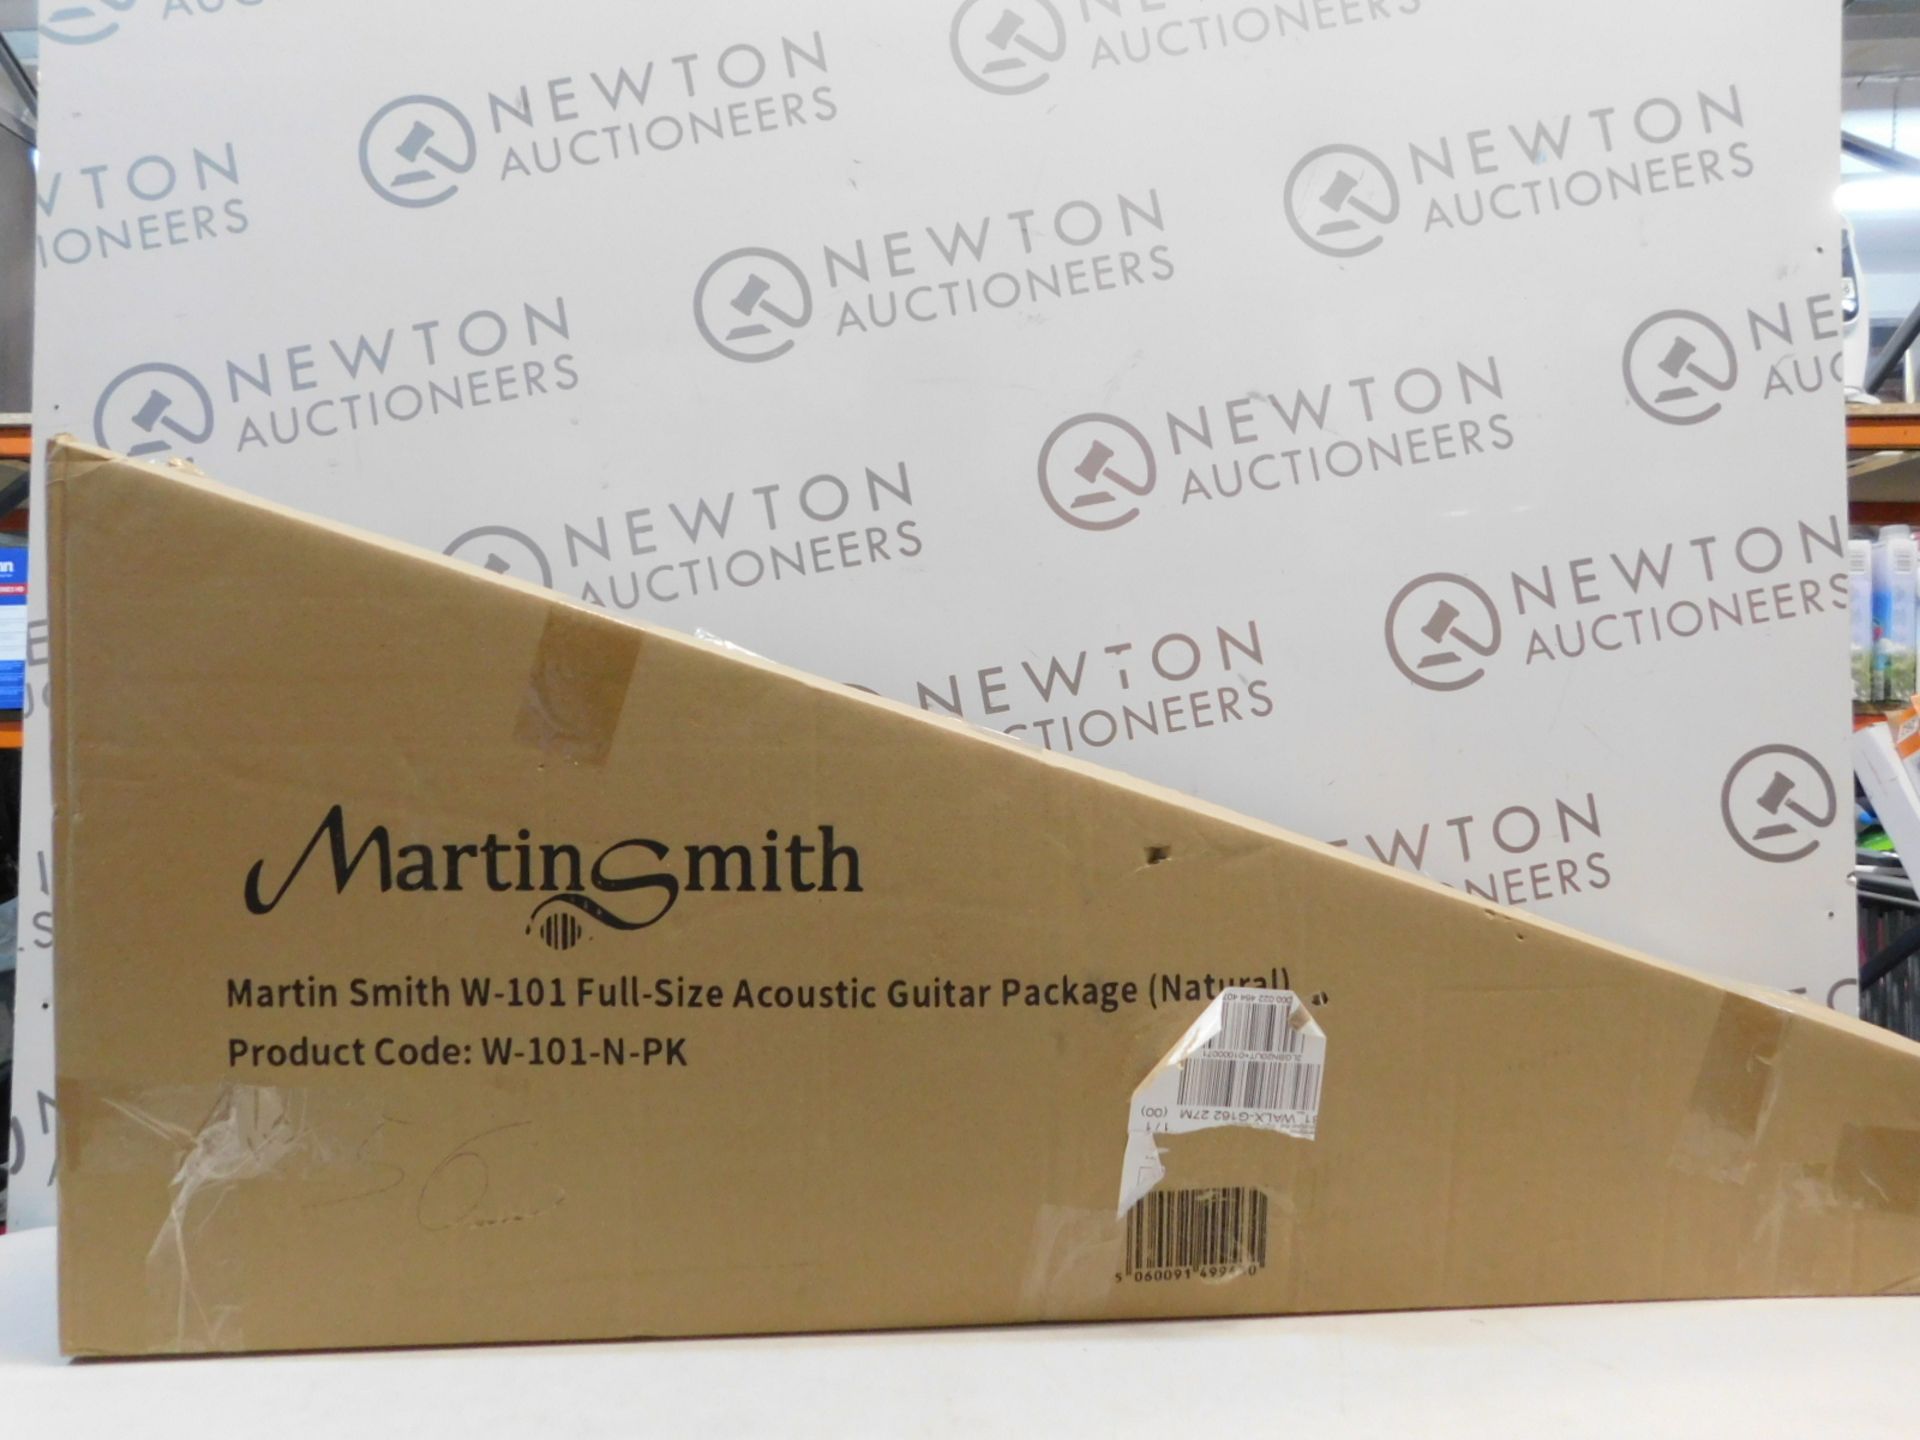 1 BOXED MARTIN SMITH W-101-PK FULL SIZE ACOUSTIC GUITAR WITH KIT RRP Â£89.99